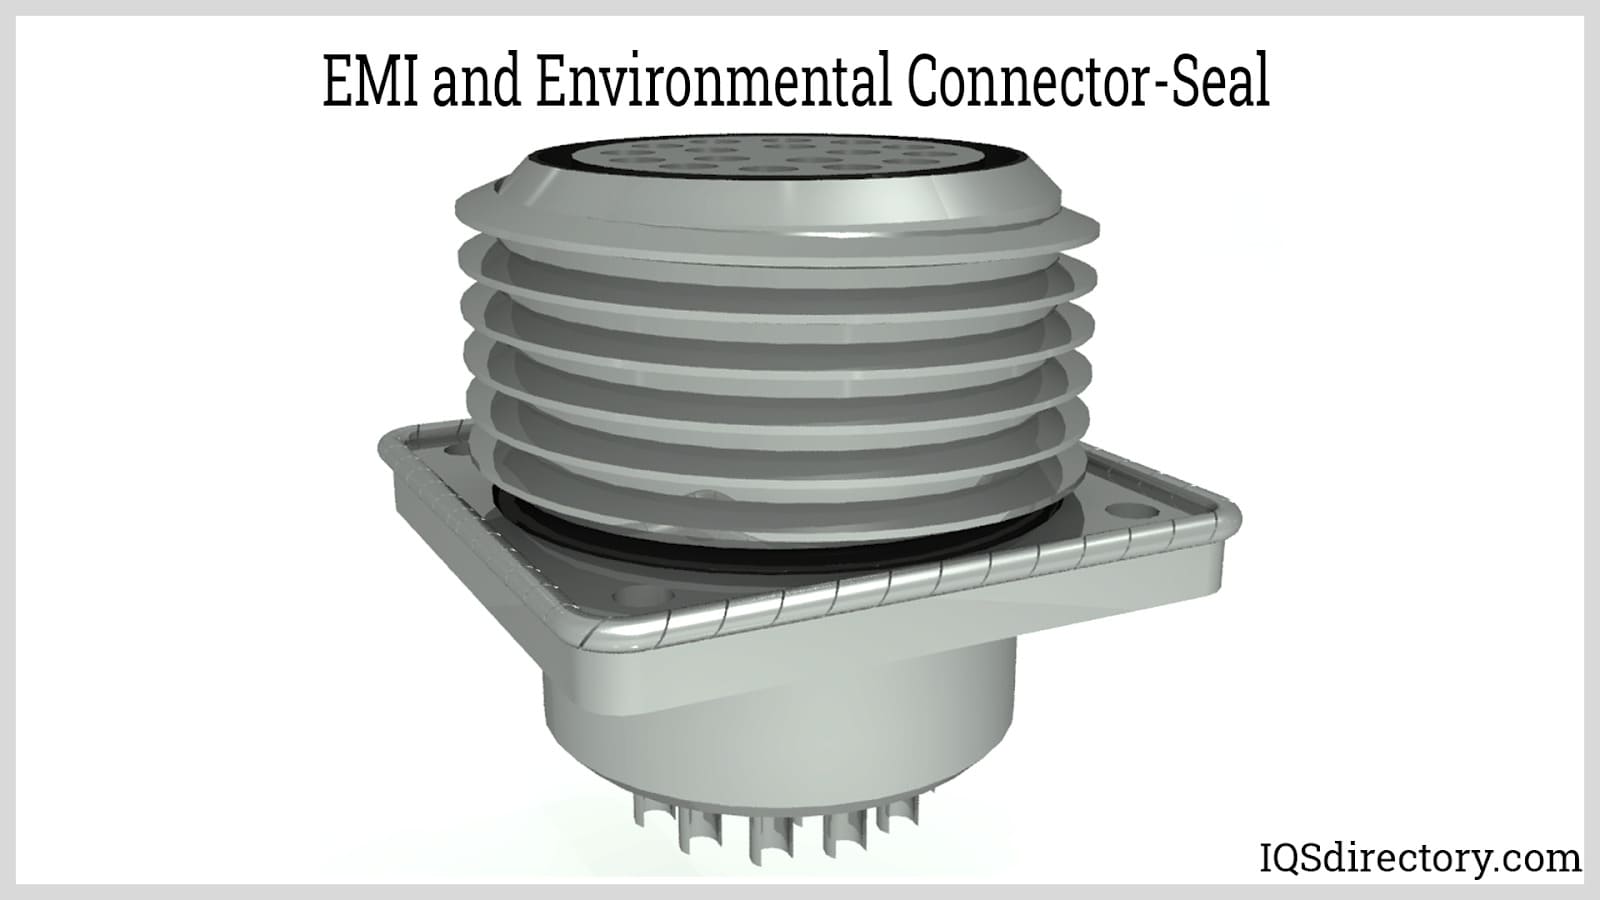 EMI and Environmental Connector-Seal